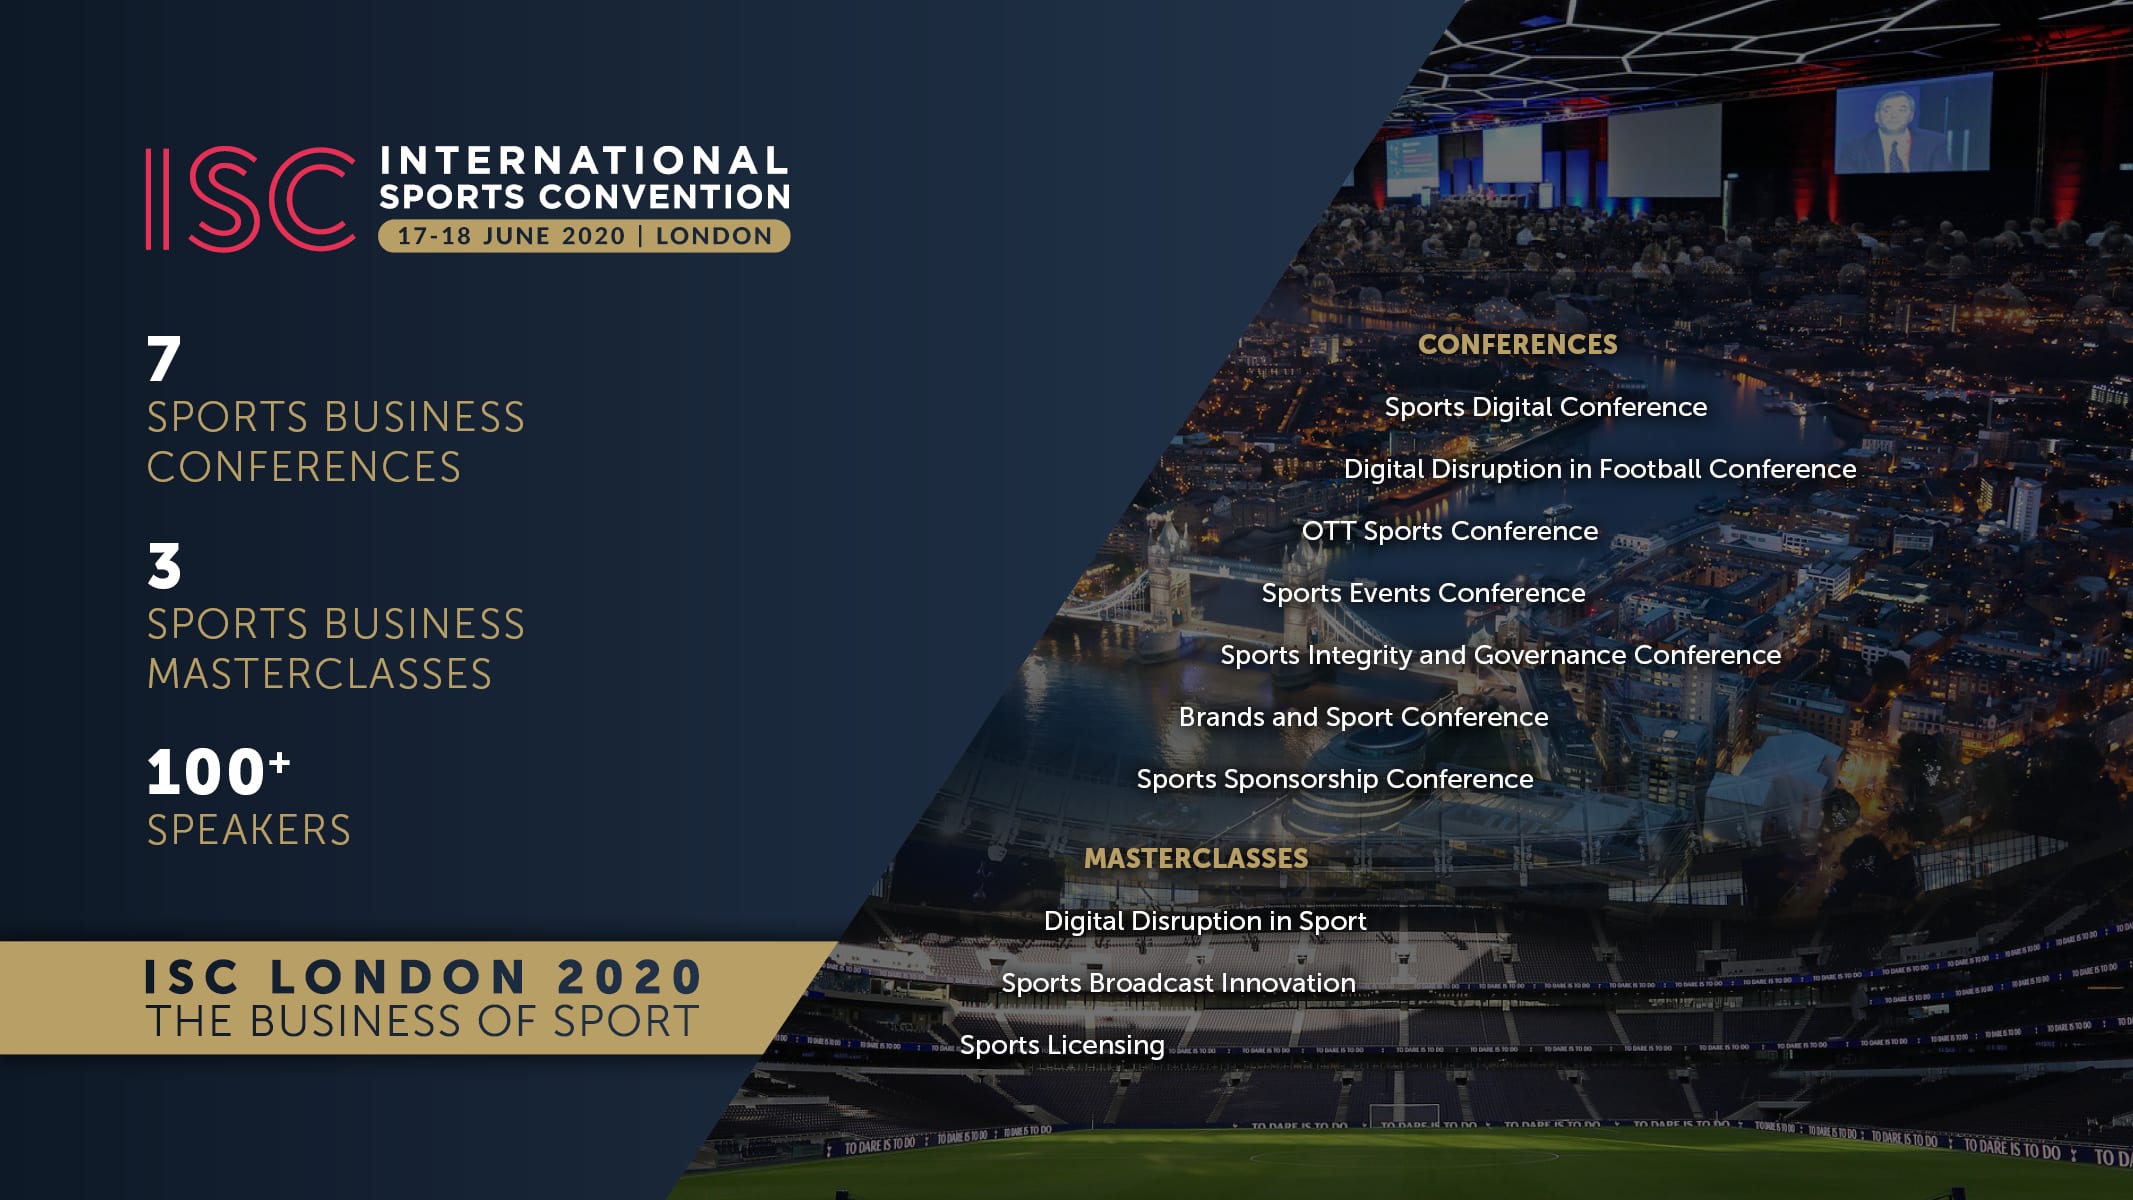 The International Sports Convention (ISC) announces the new format for